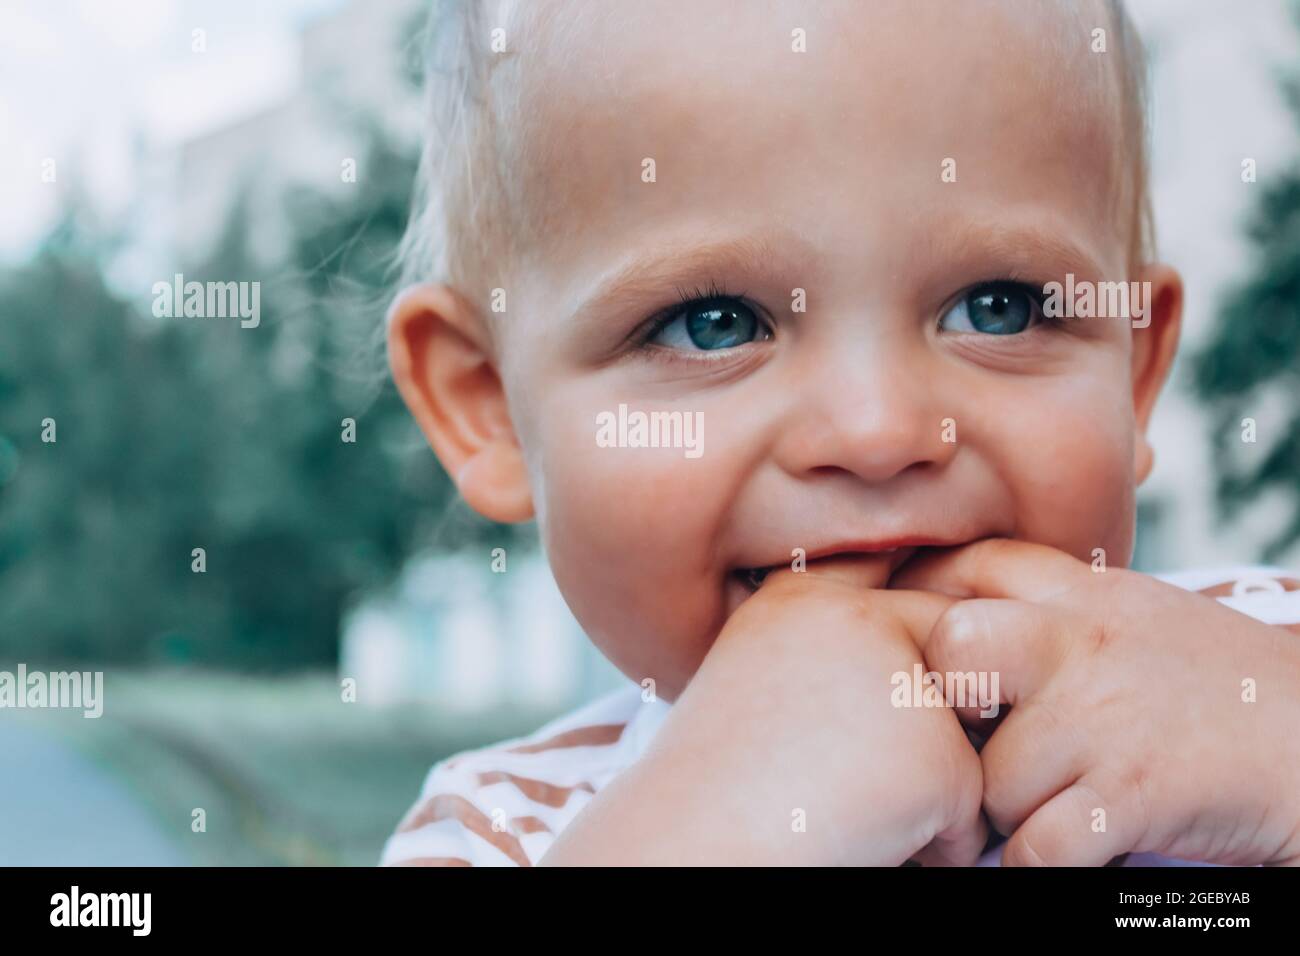 Little baby boy holding fingers in mouth. Stock Photo